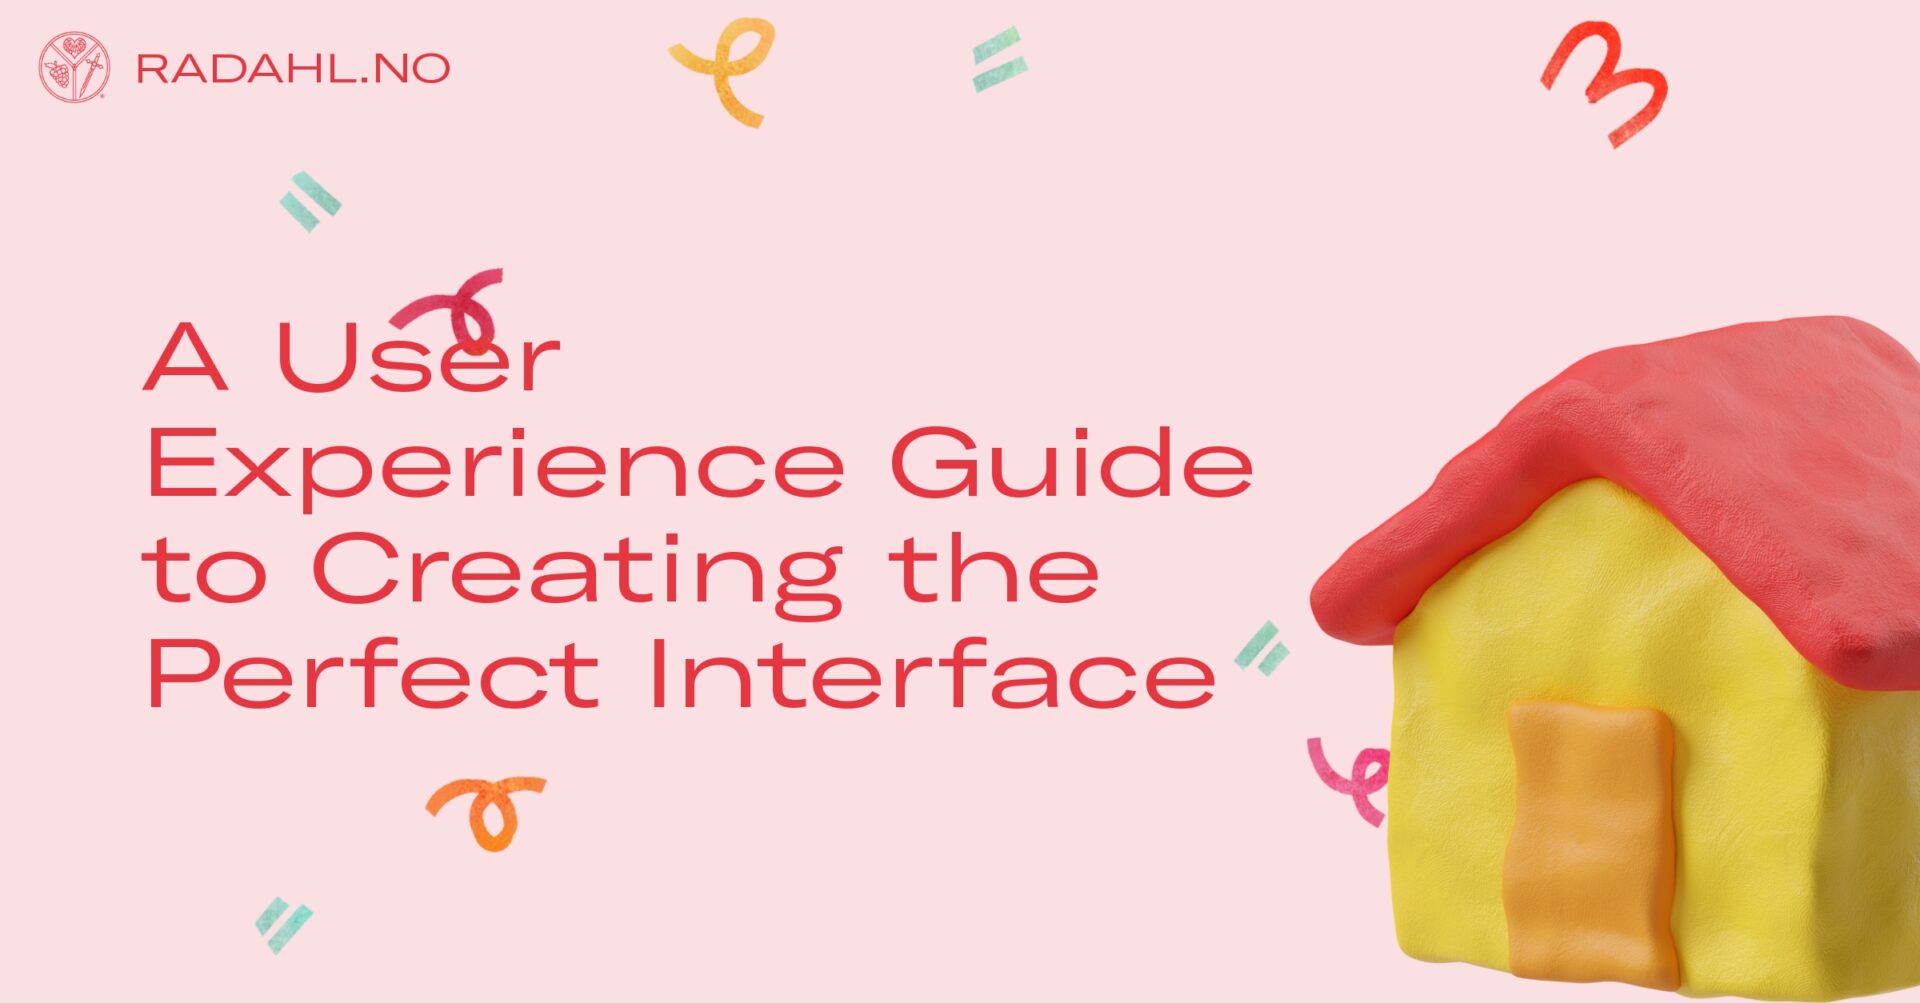 A user experience guide to creating the perfect interface